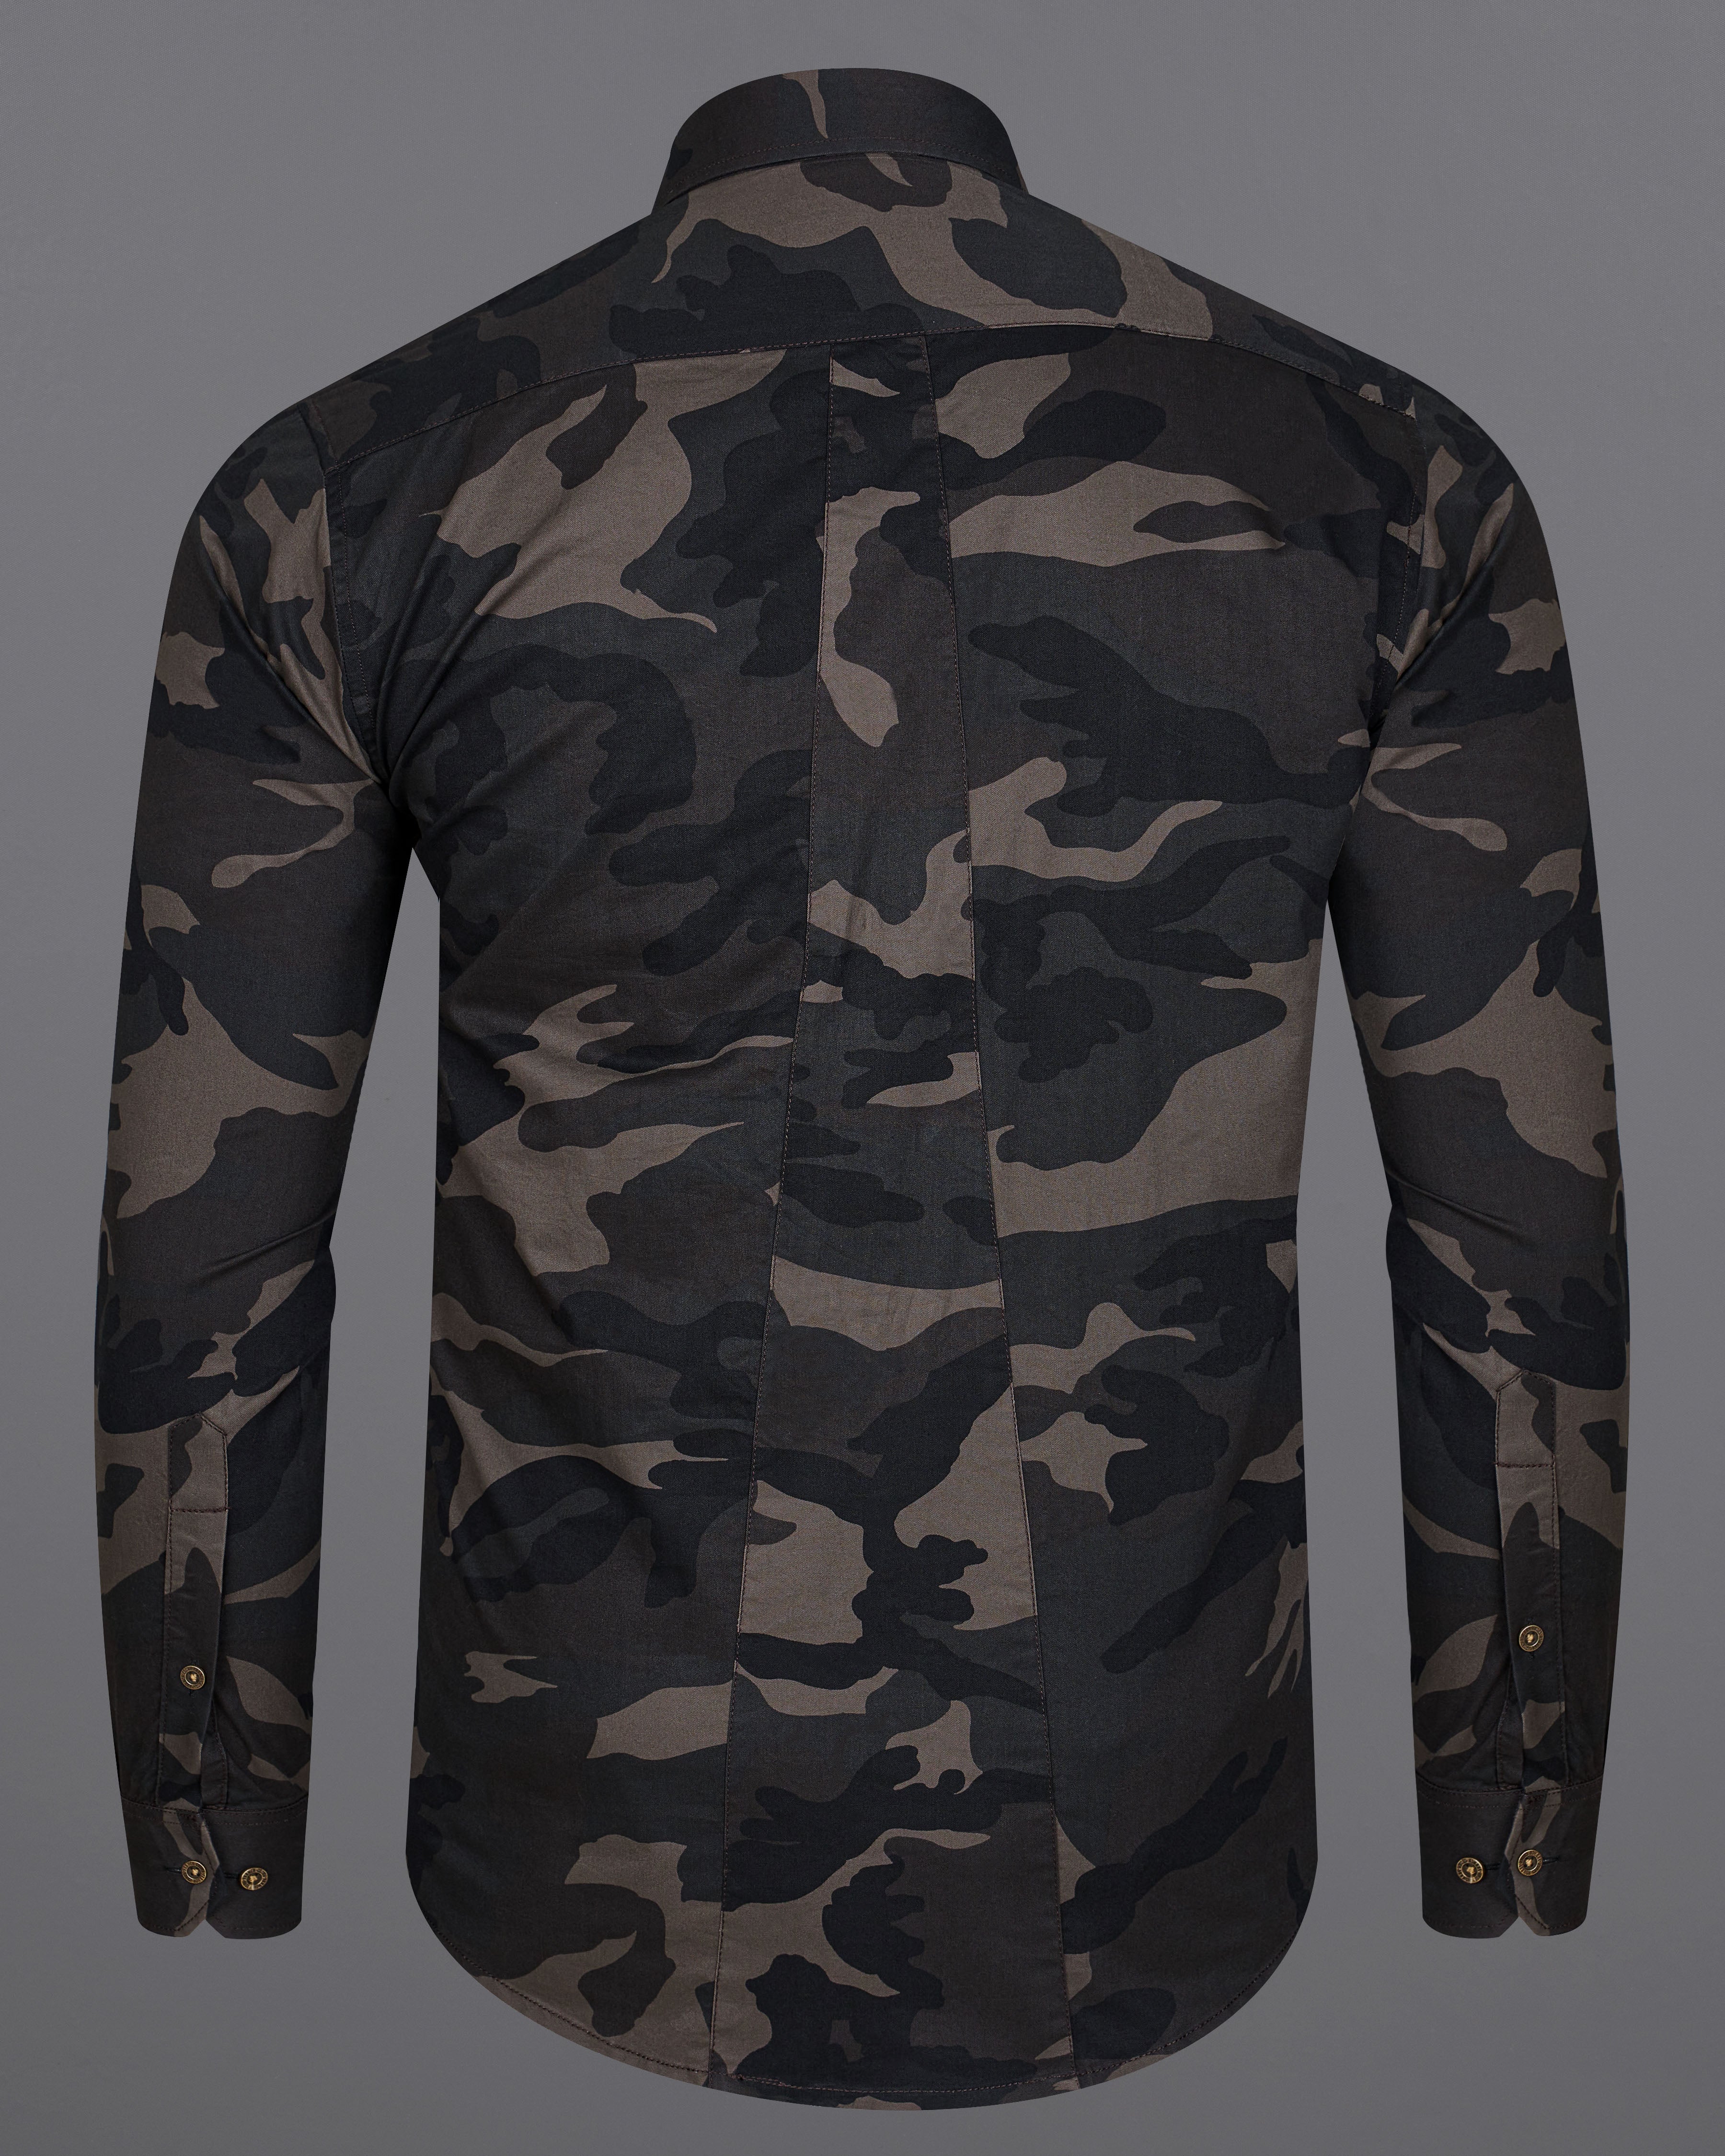 Birch Brown with Thunder Green Multi Coloured  Camouflage Military Printed Royal Oxford Designer Shirt 8906-MB-P314-38, 8906-MB-P314-H-38,  8906-MB-P314-39,  8906-MB-P314-H-39,  8906-MB-P314-40,  8906-MB-P314-H-40,  8906-MB-P314-42,  8906-MB-P314-H-42,  8906-MB-P314-44,  8906-MB-P314-H-44,  8906-MB-P314-46,  8906-MB-P314-H-46,  8906-MB-P314-48,  8906-MB-P314-H-48,  8906-MB-P314-50,  8906-MB-P314-H-50,  8906-MB-P314-52,  8906-MB-P314-H-52